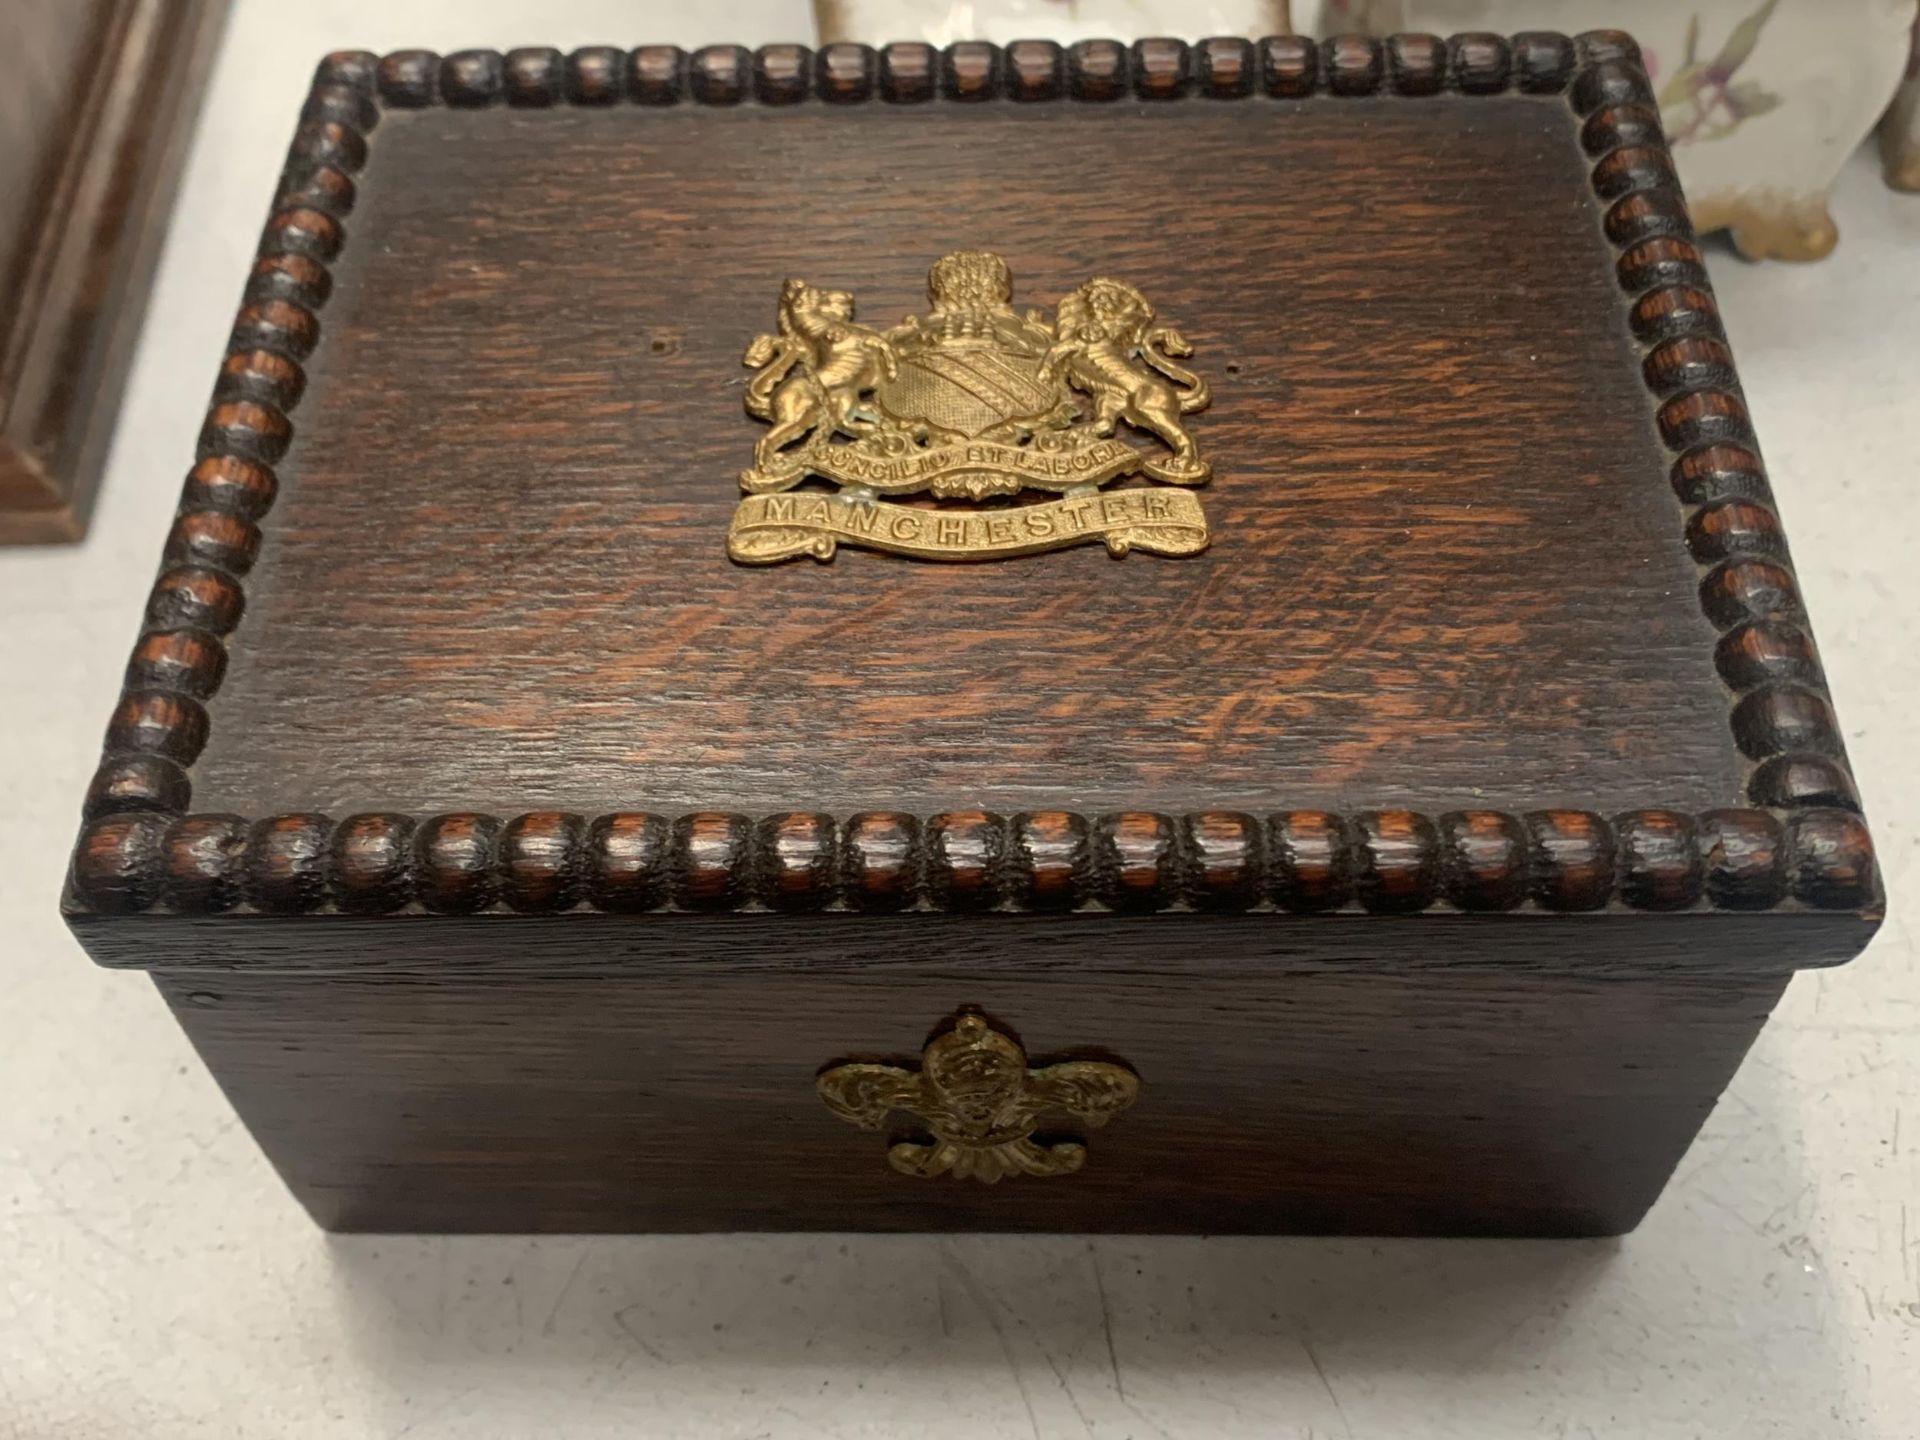 AN ORNATE WOODEN BOX WITH THE MANCHESTER COAT OF ARMS TO THE LID IN YELLOW METAL AND A FURTHER WHEAT